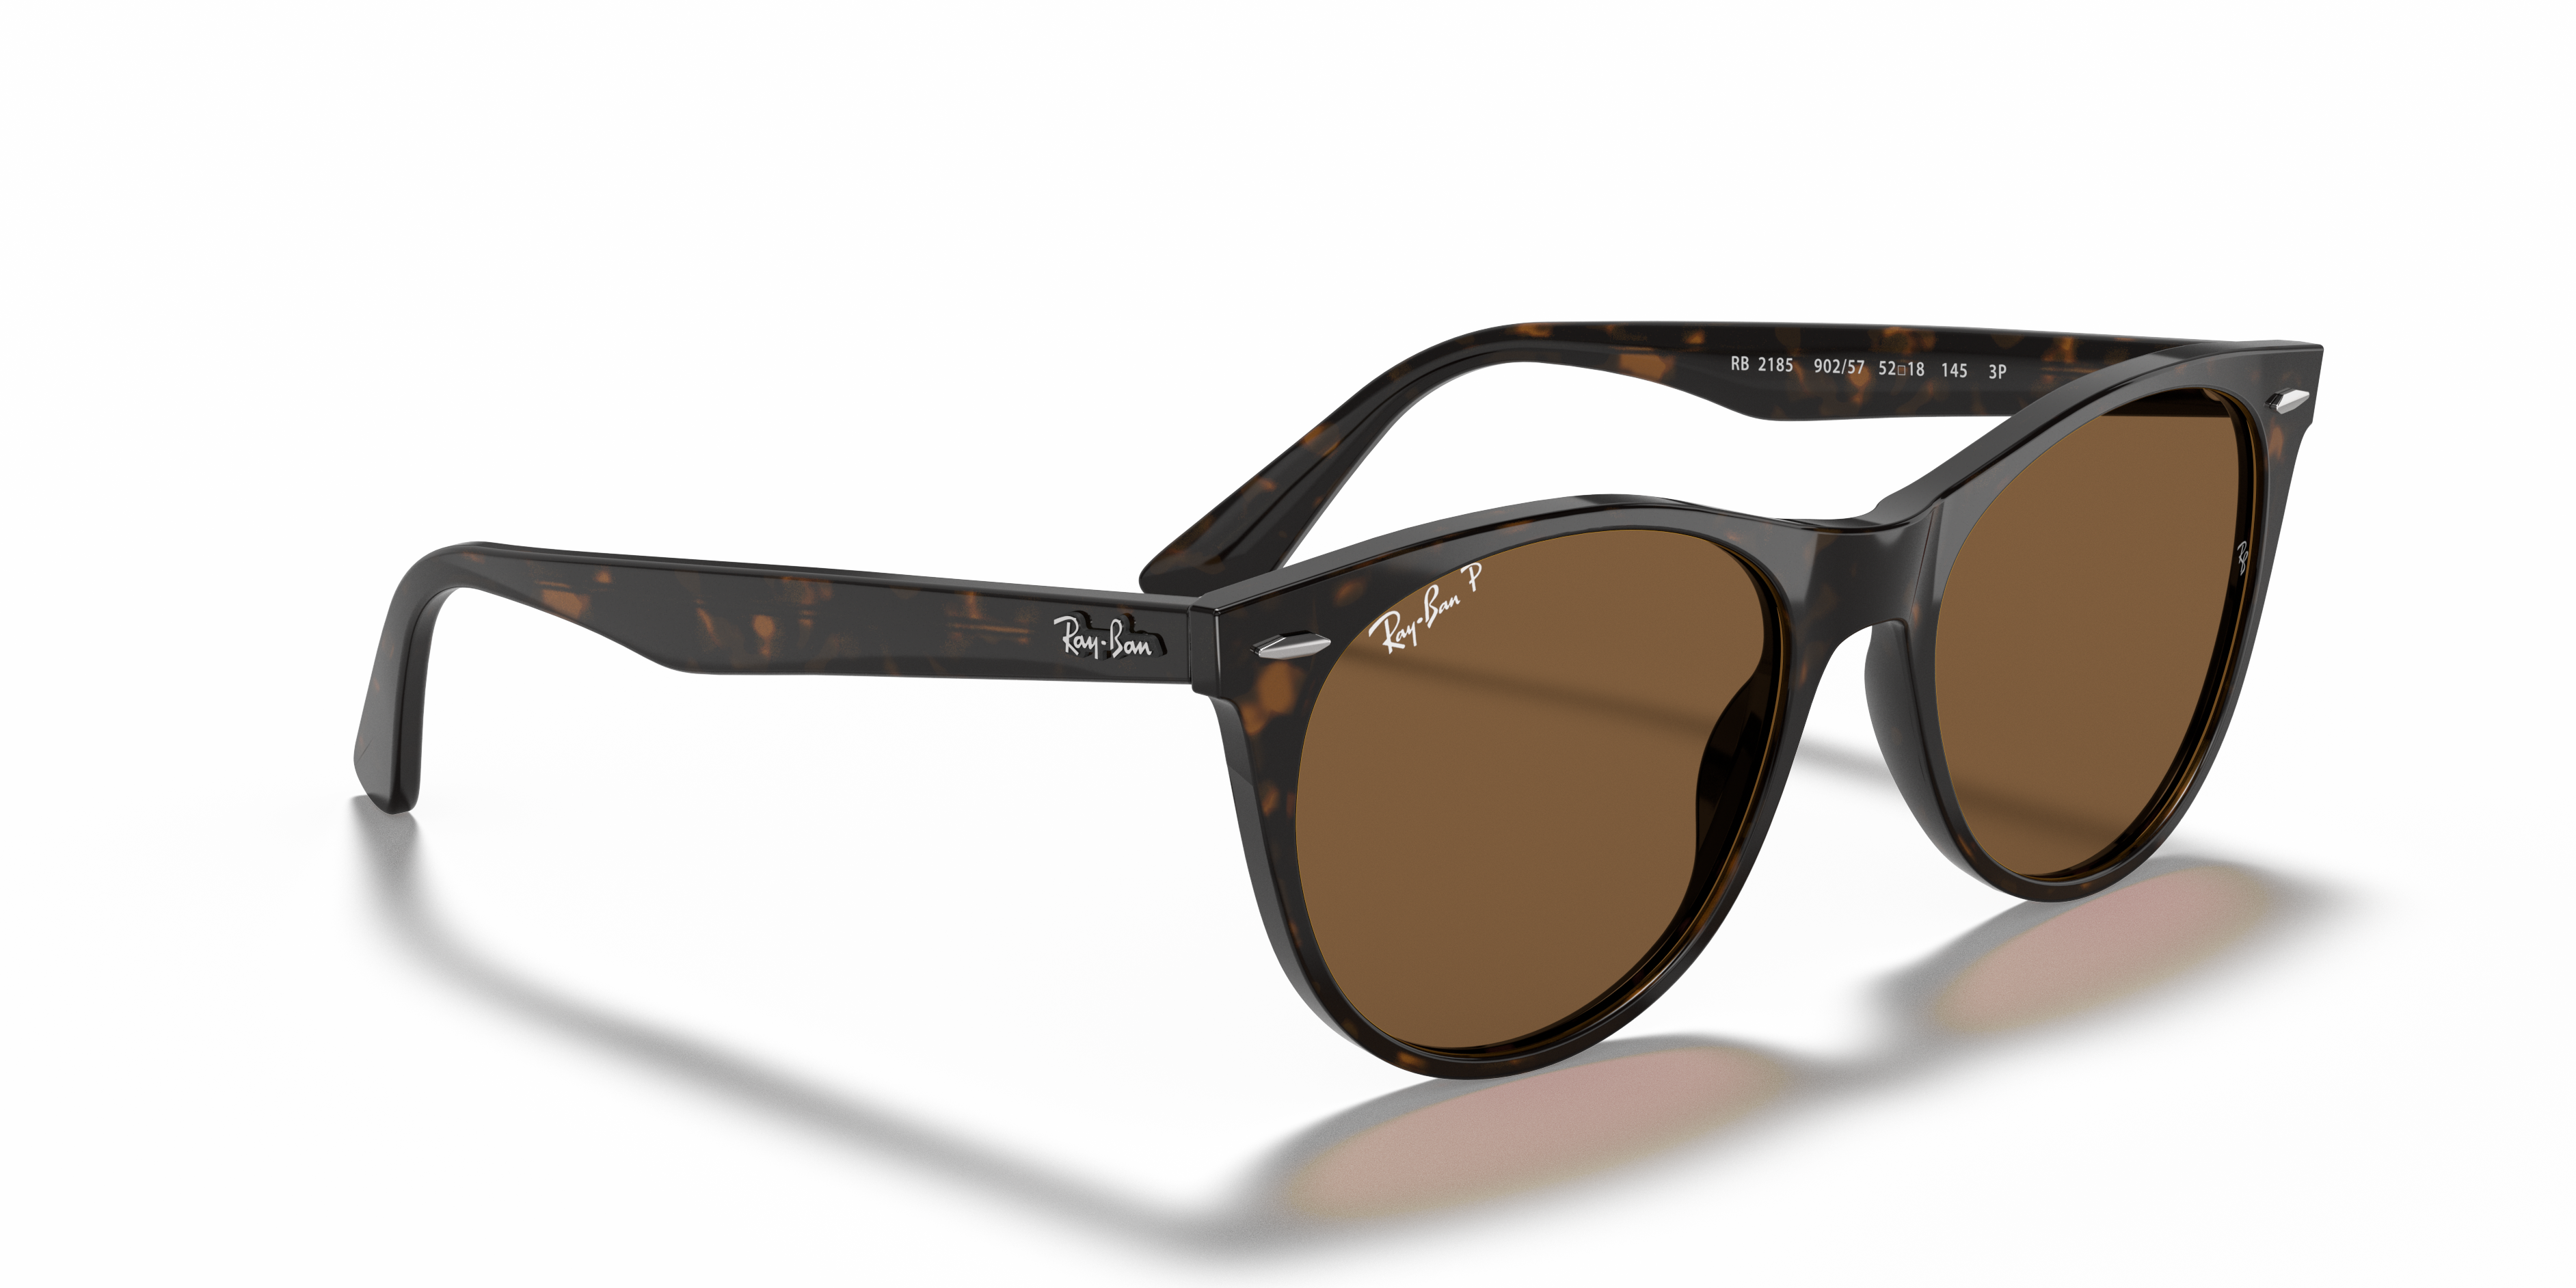 Check out the Wayfarer Ii Classic at ray-ban.com